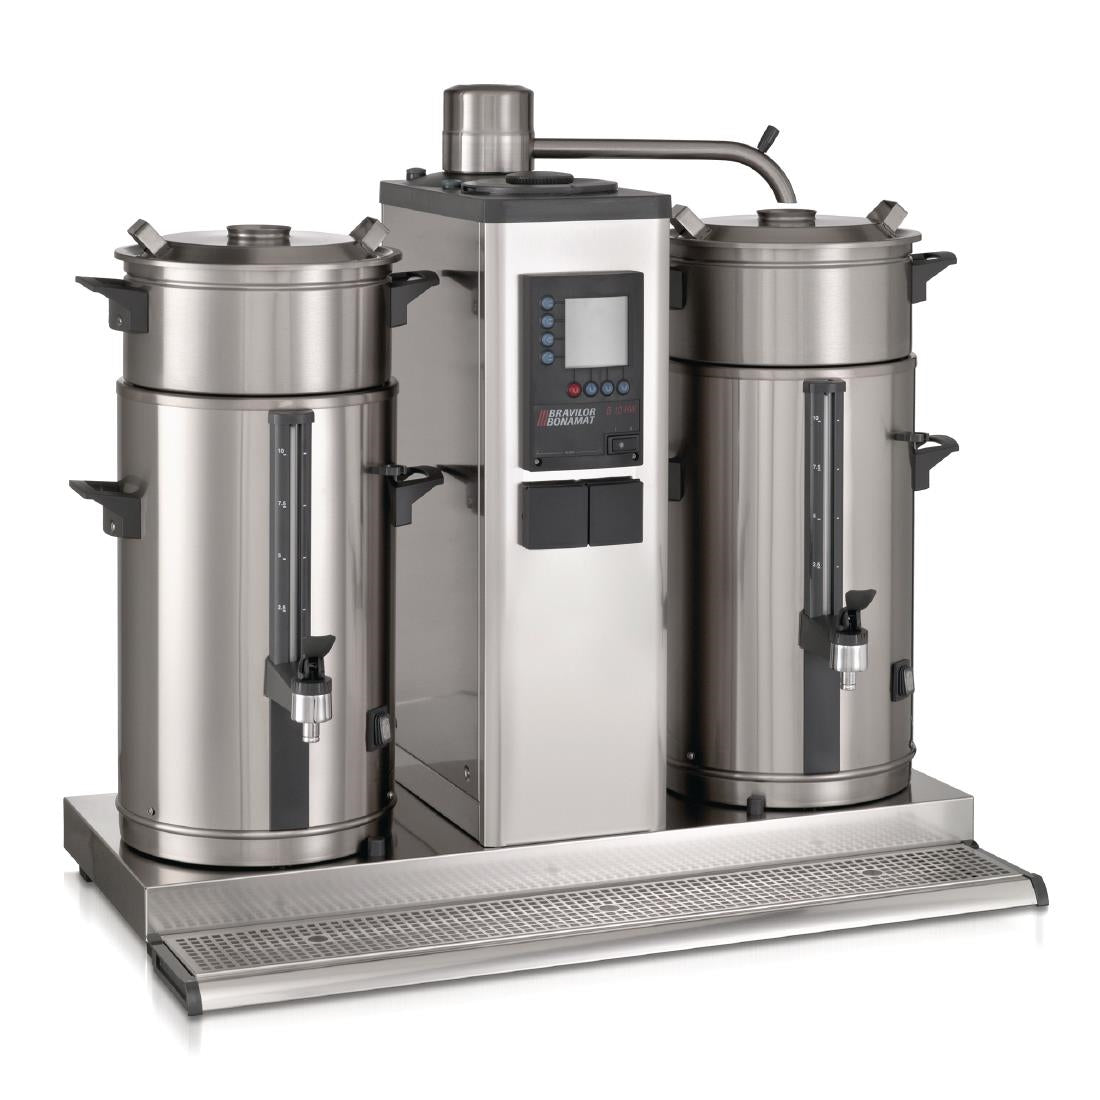 DC681 Bravilor B20 Bulk Coffee Brewer with 2x20Ltr Coffee Urns 3 Phase JD Catering Equipment Solutions Ltd